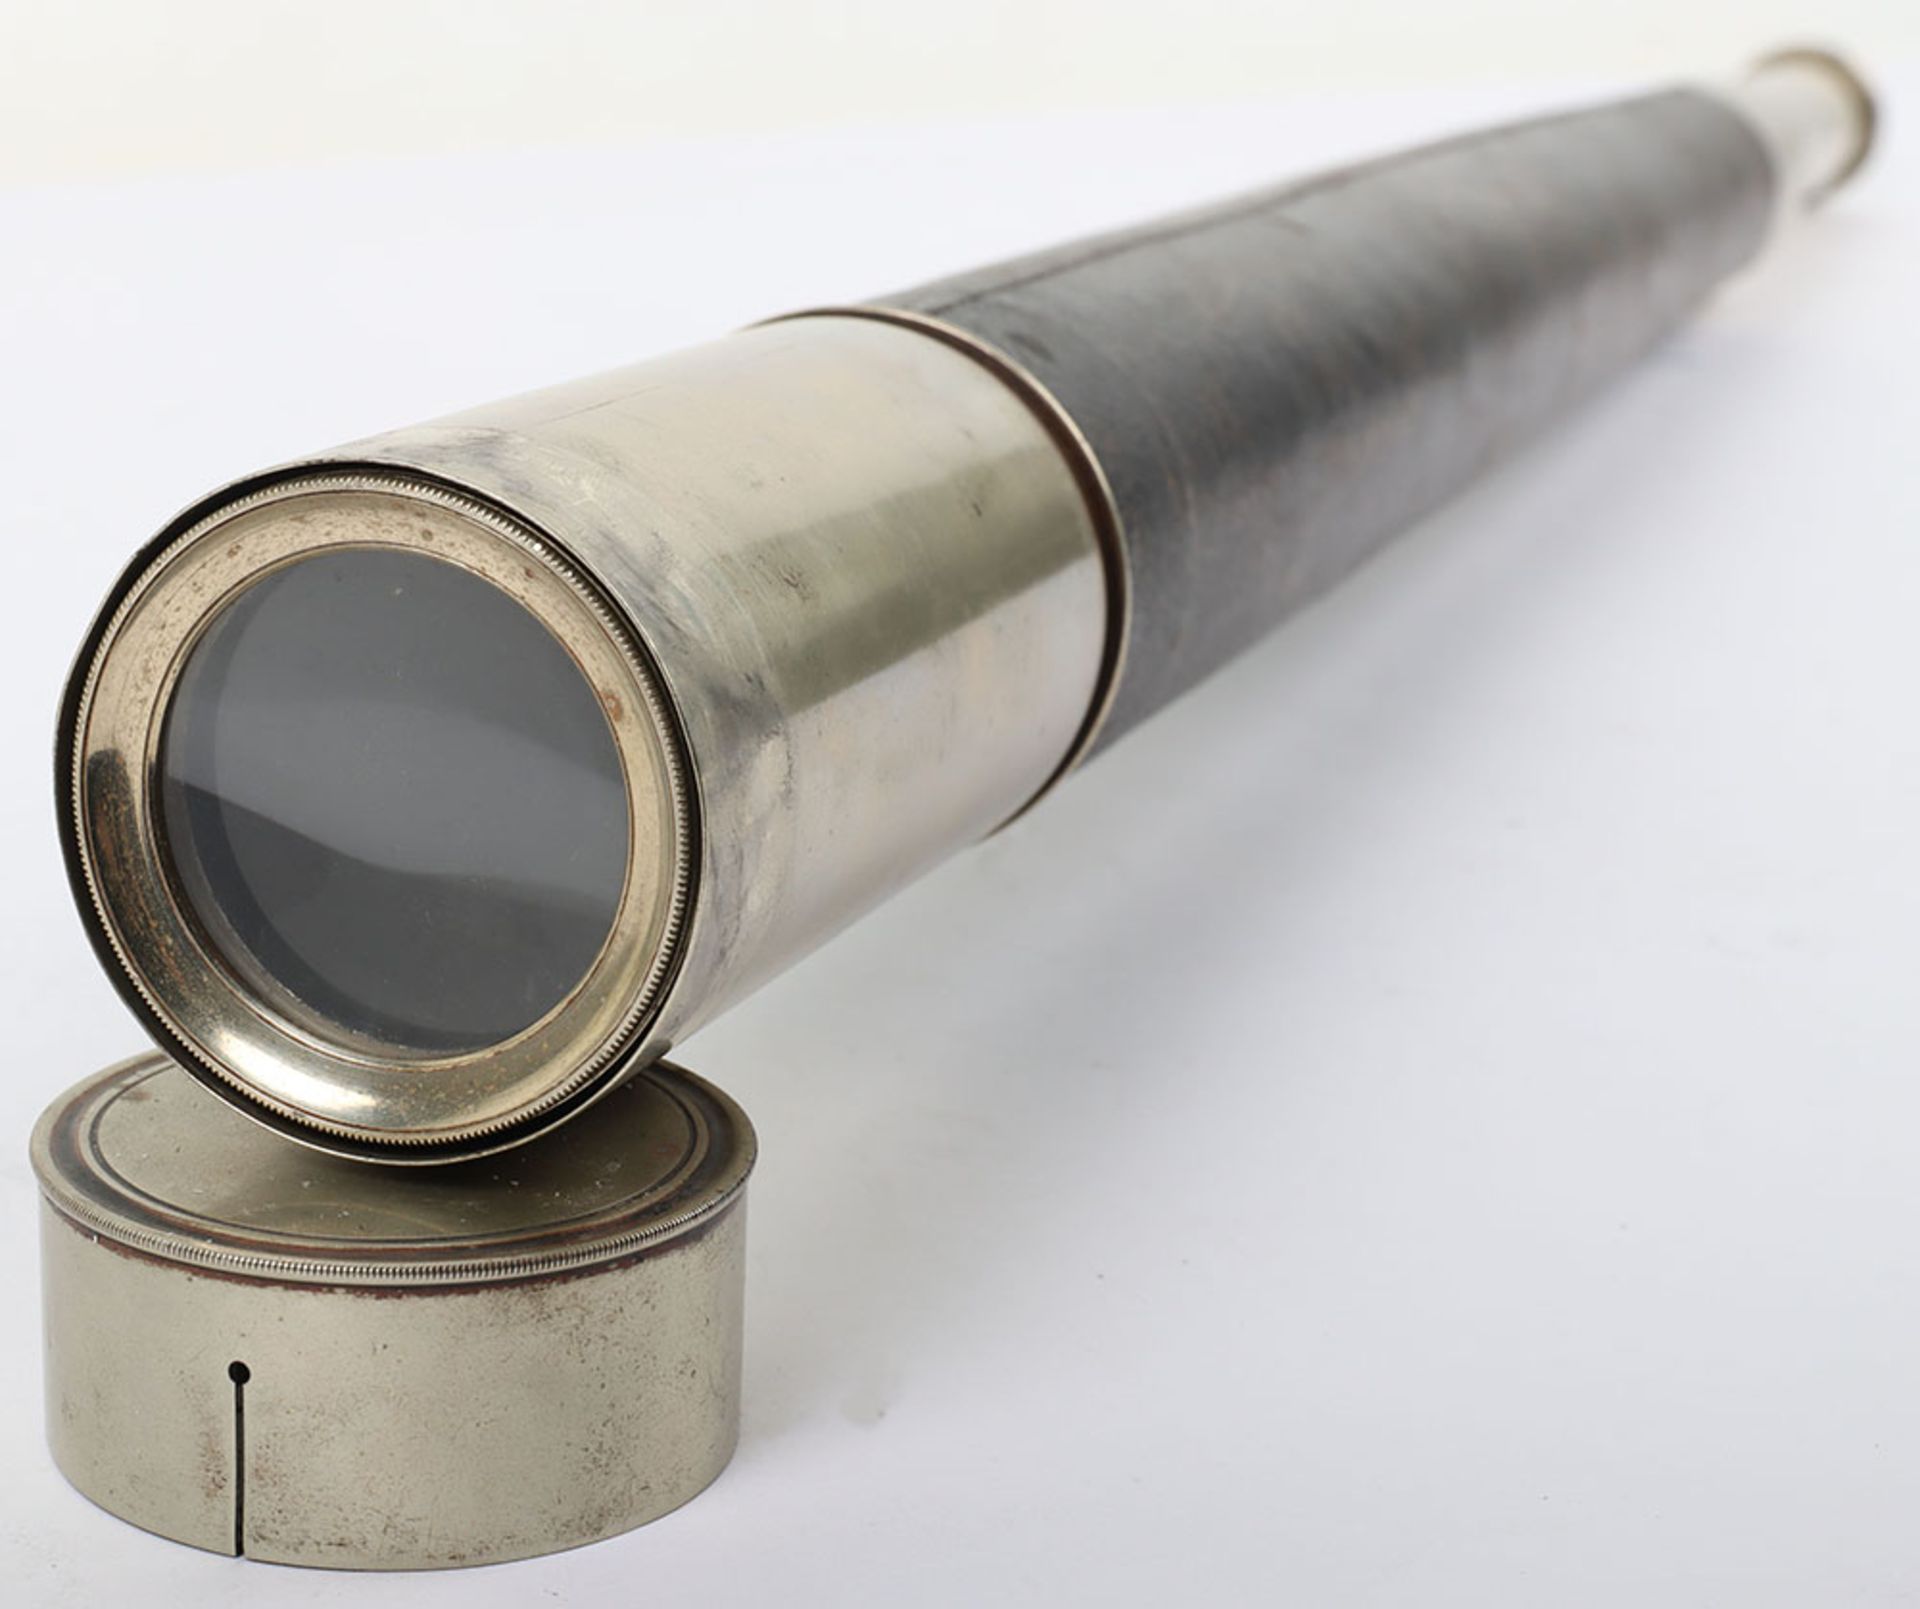 A 19th century Royal Navy Officers telescope by Dollond, London belonging to ‘J.P. Pipon R.N’ - Image 4 of 6